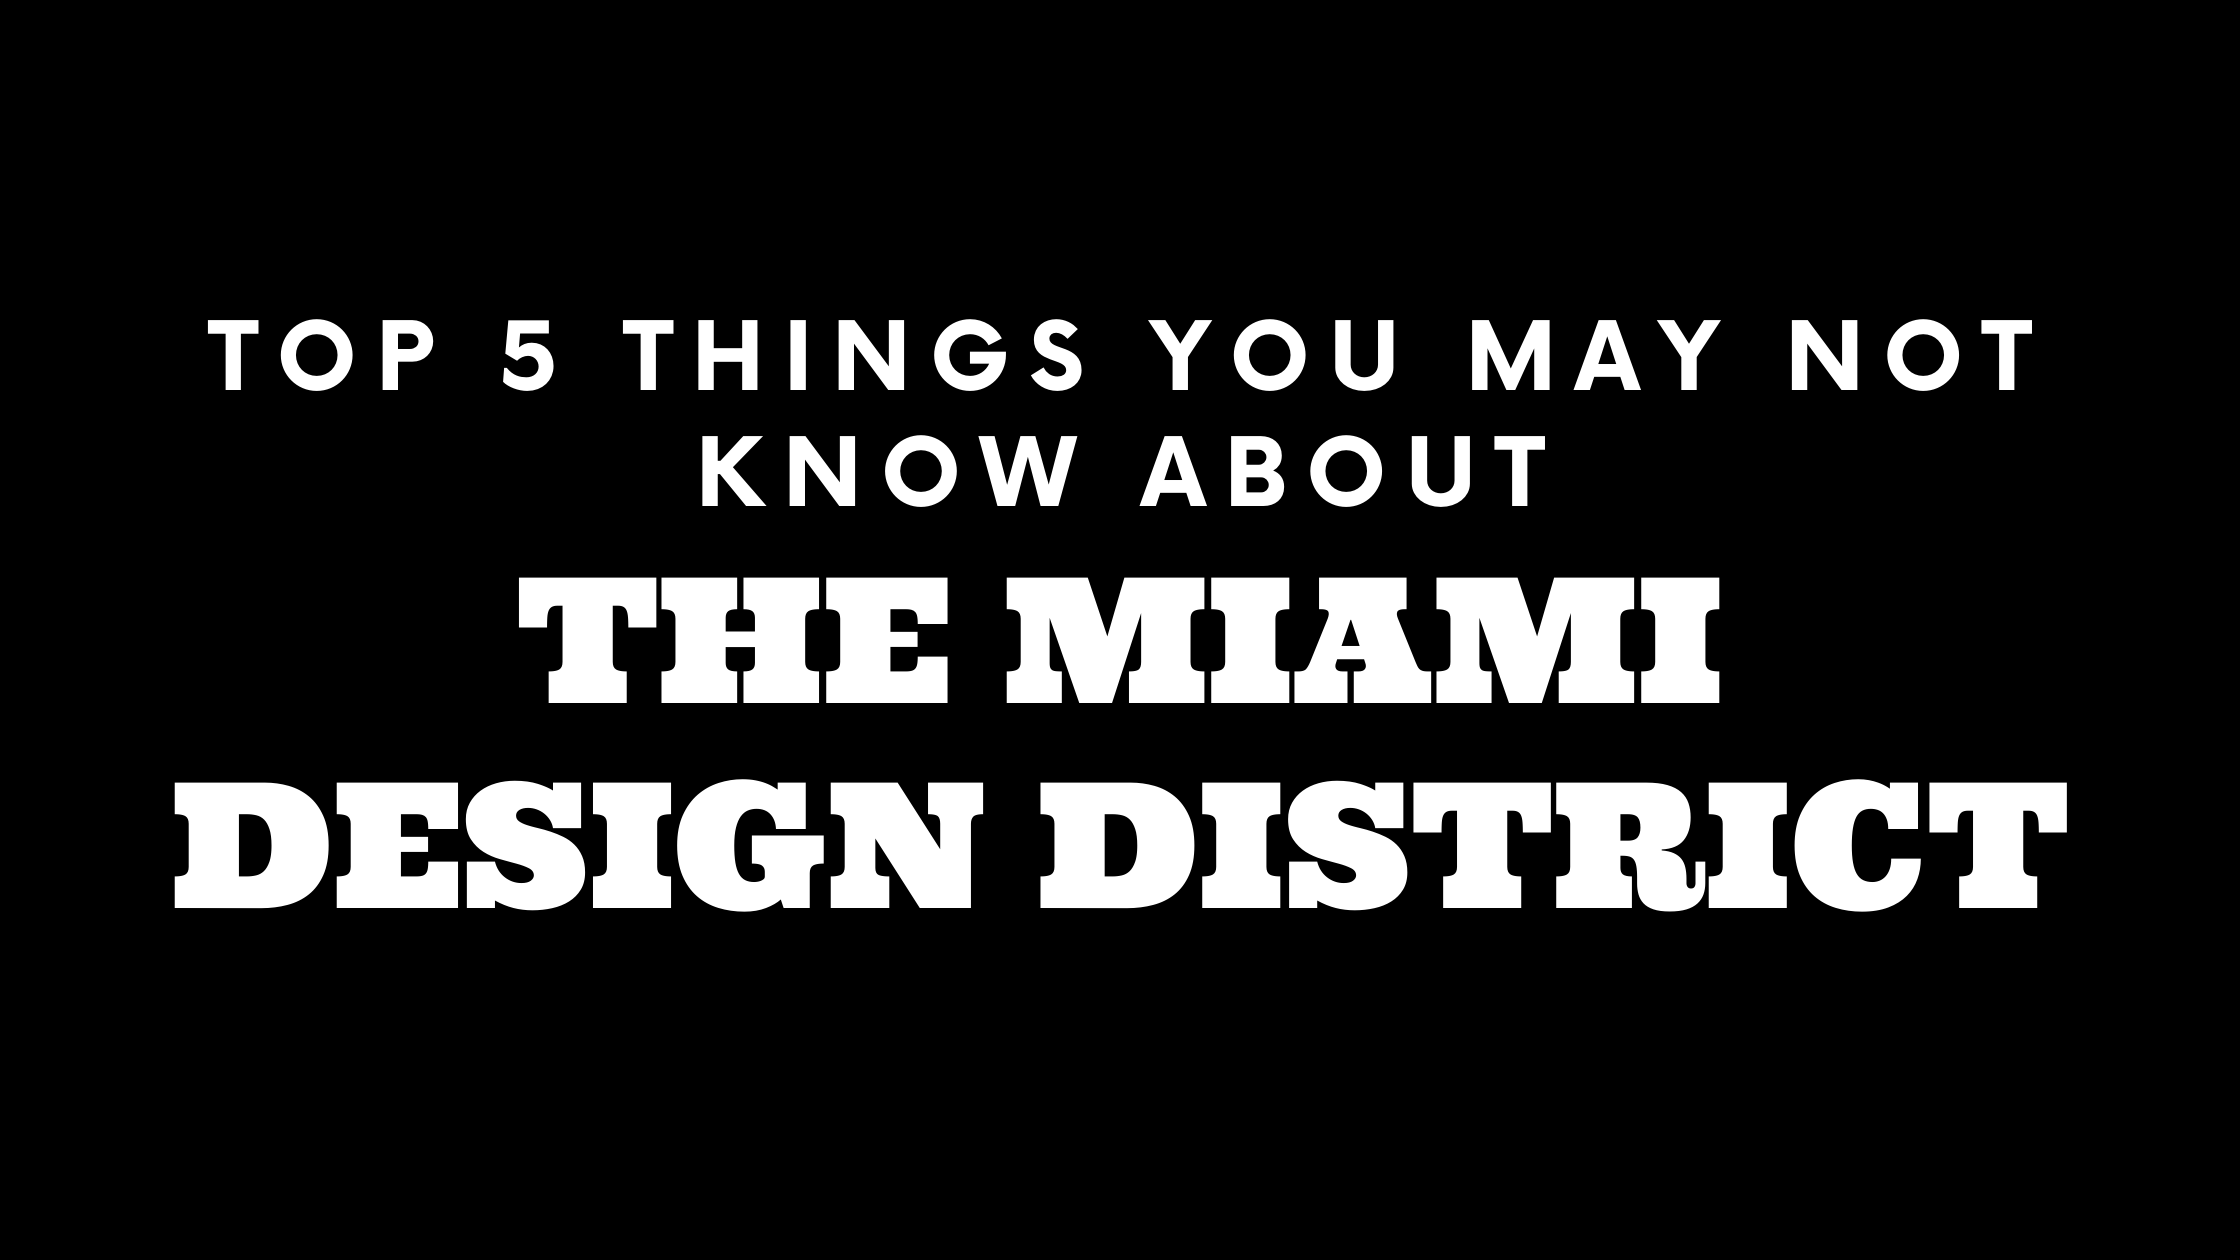 Miami Design District - All You Need to Know BEFORE You Go (with Photos)